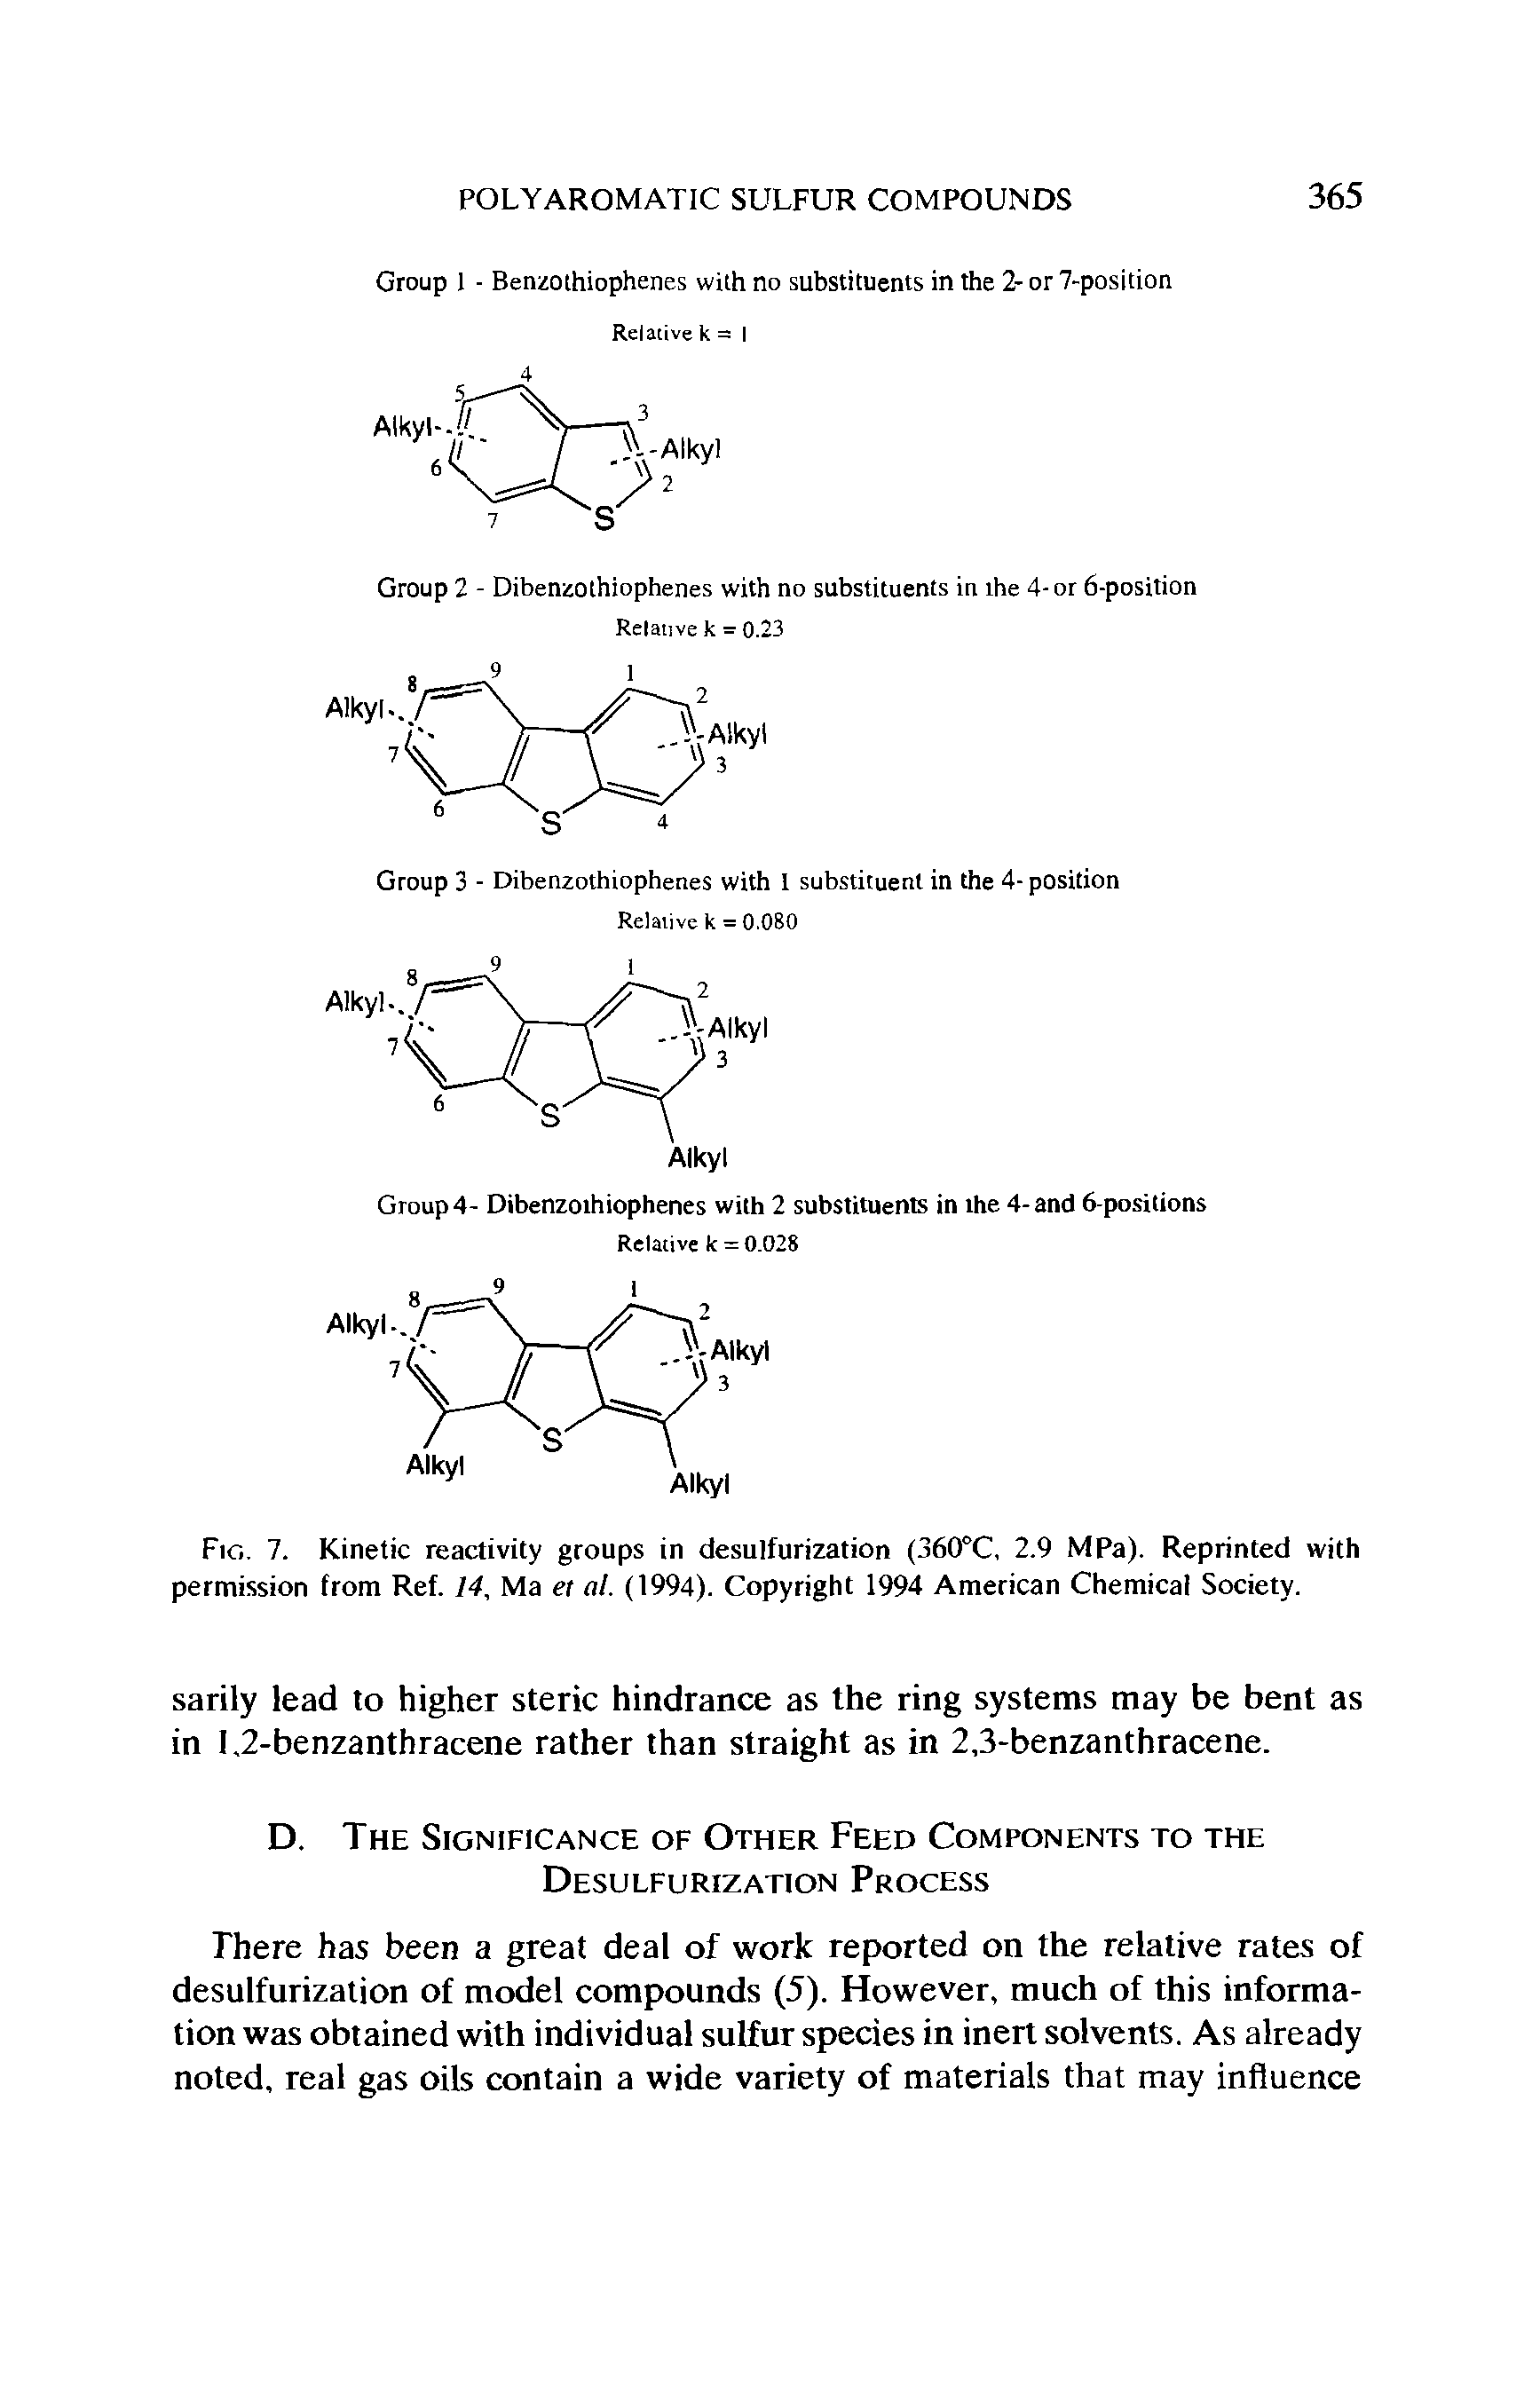 Fig. 7. Kinetic reactivity groups in desulfurization (360°C, 2.9 MPa). Reprinted with permission from Ref. 14, Ma et at. (1994). Copyright 1994 American Chemical Society.